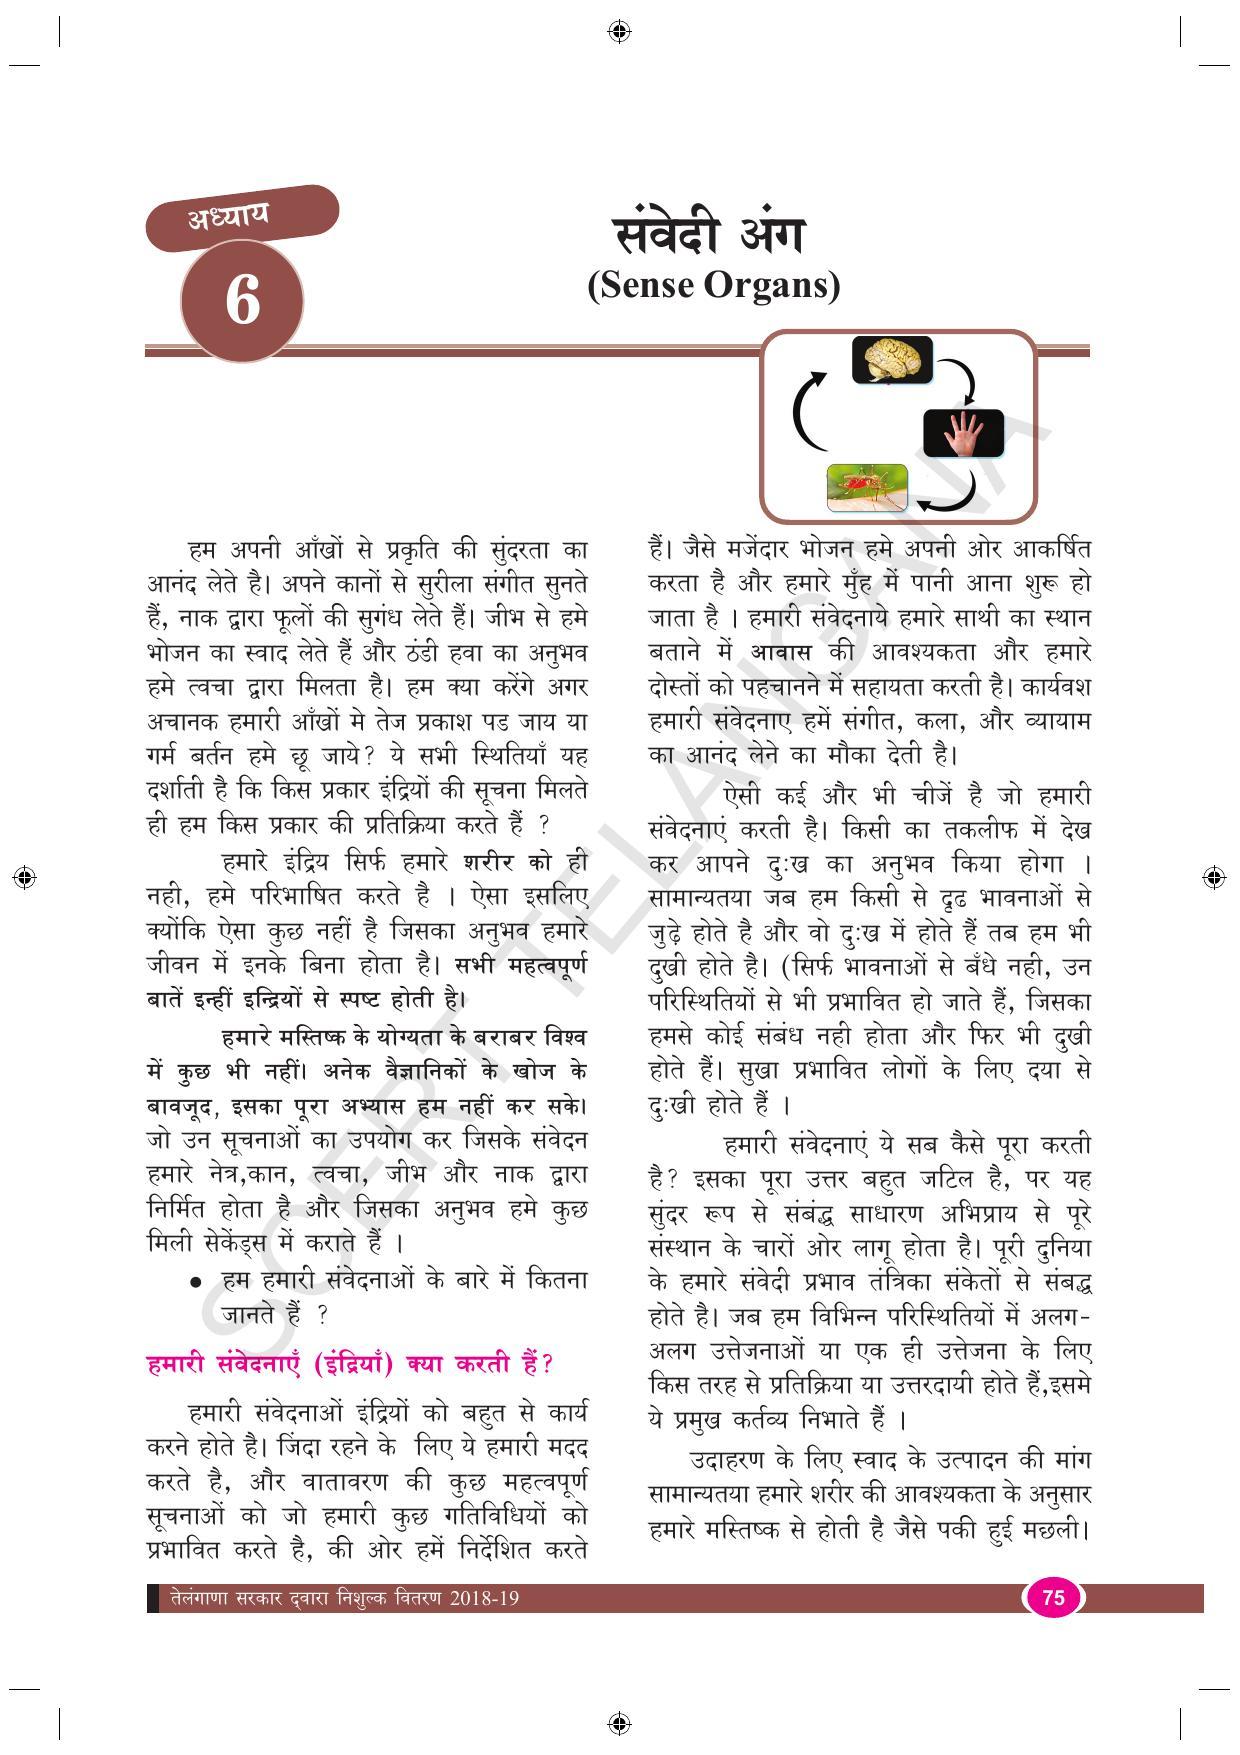 TS SCERT Class 9 Biological Science (Hindi Medium) Text Book - Page 87